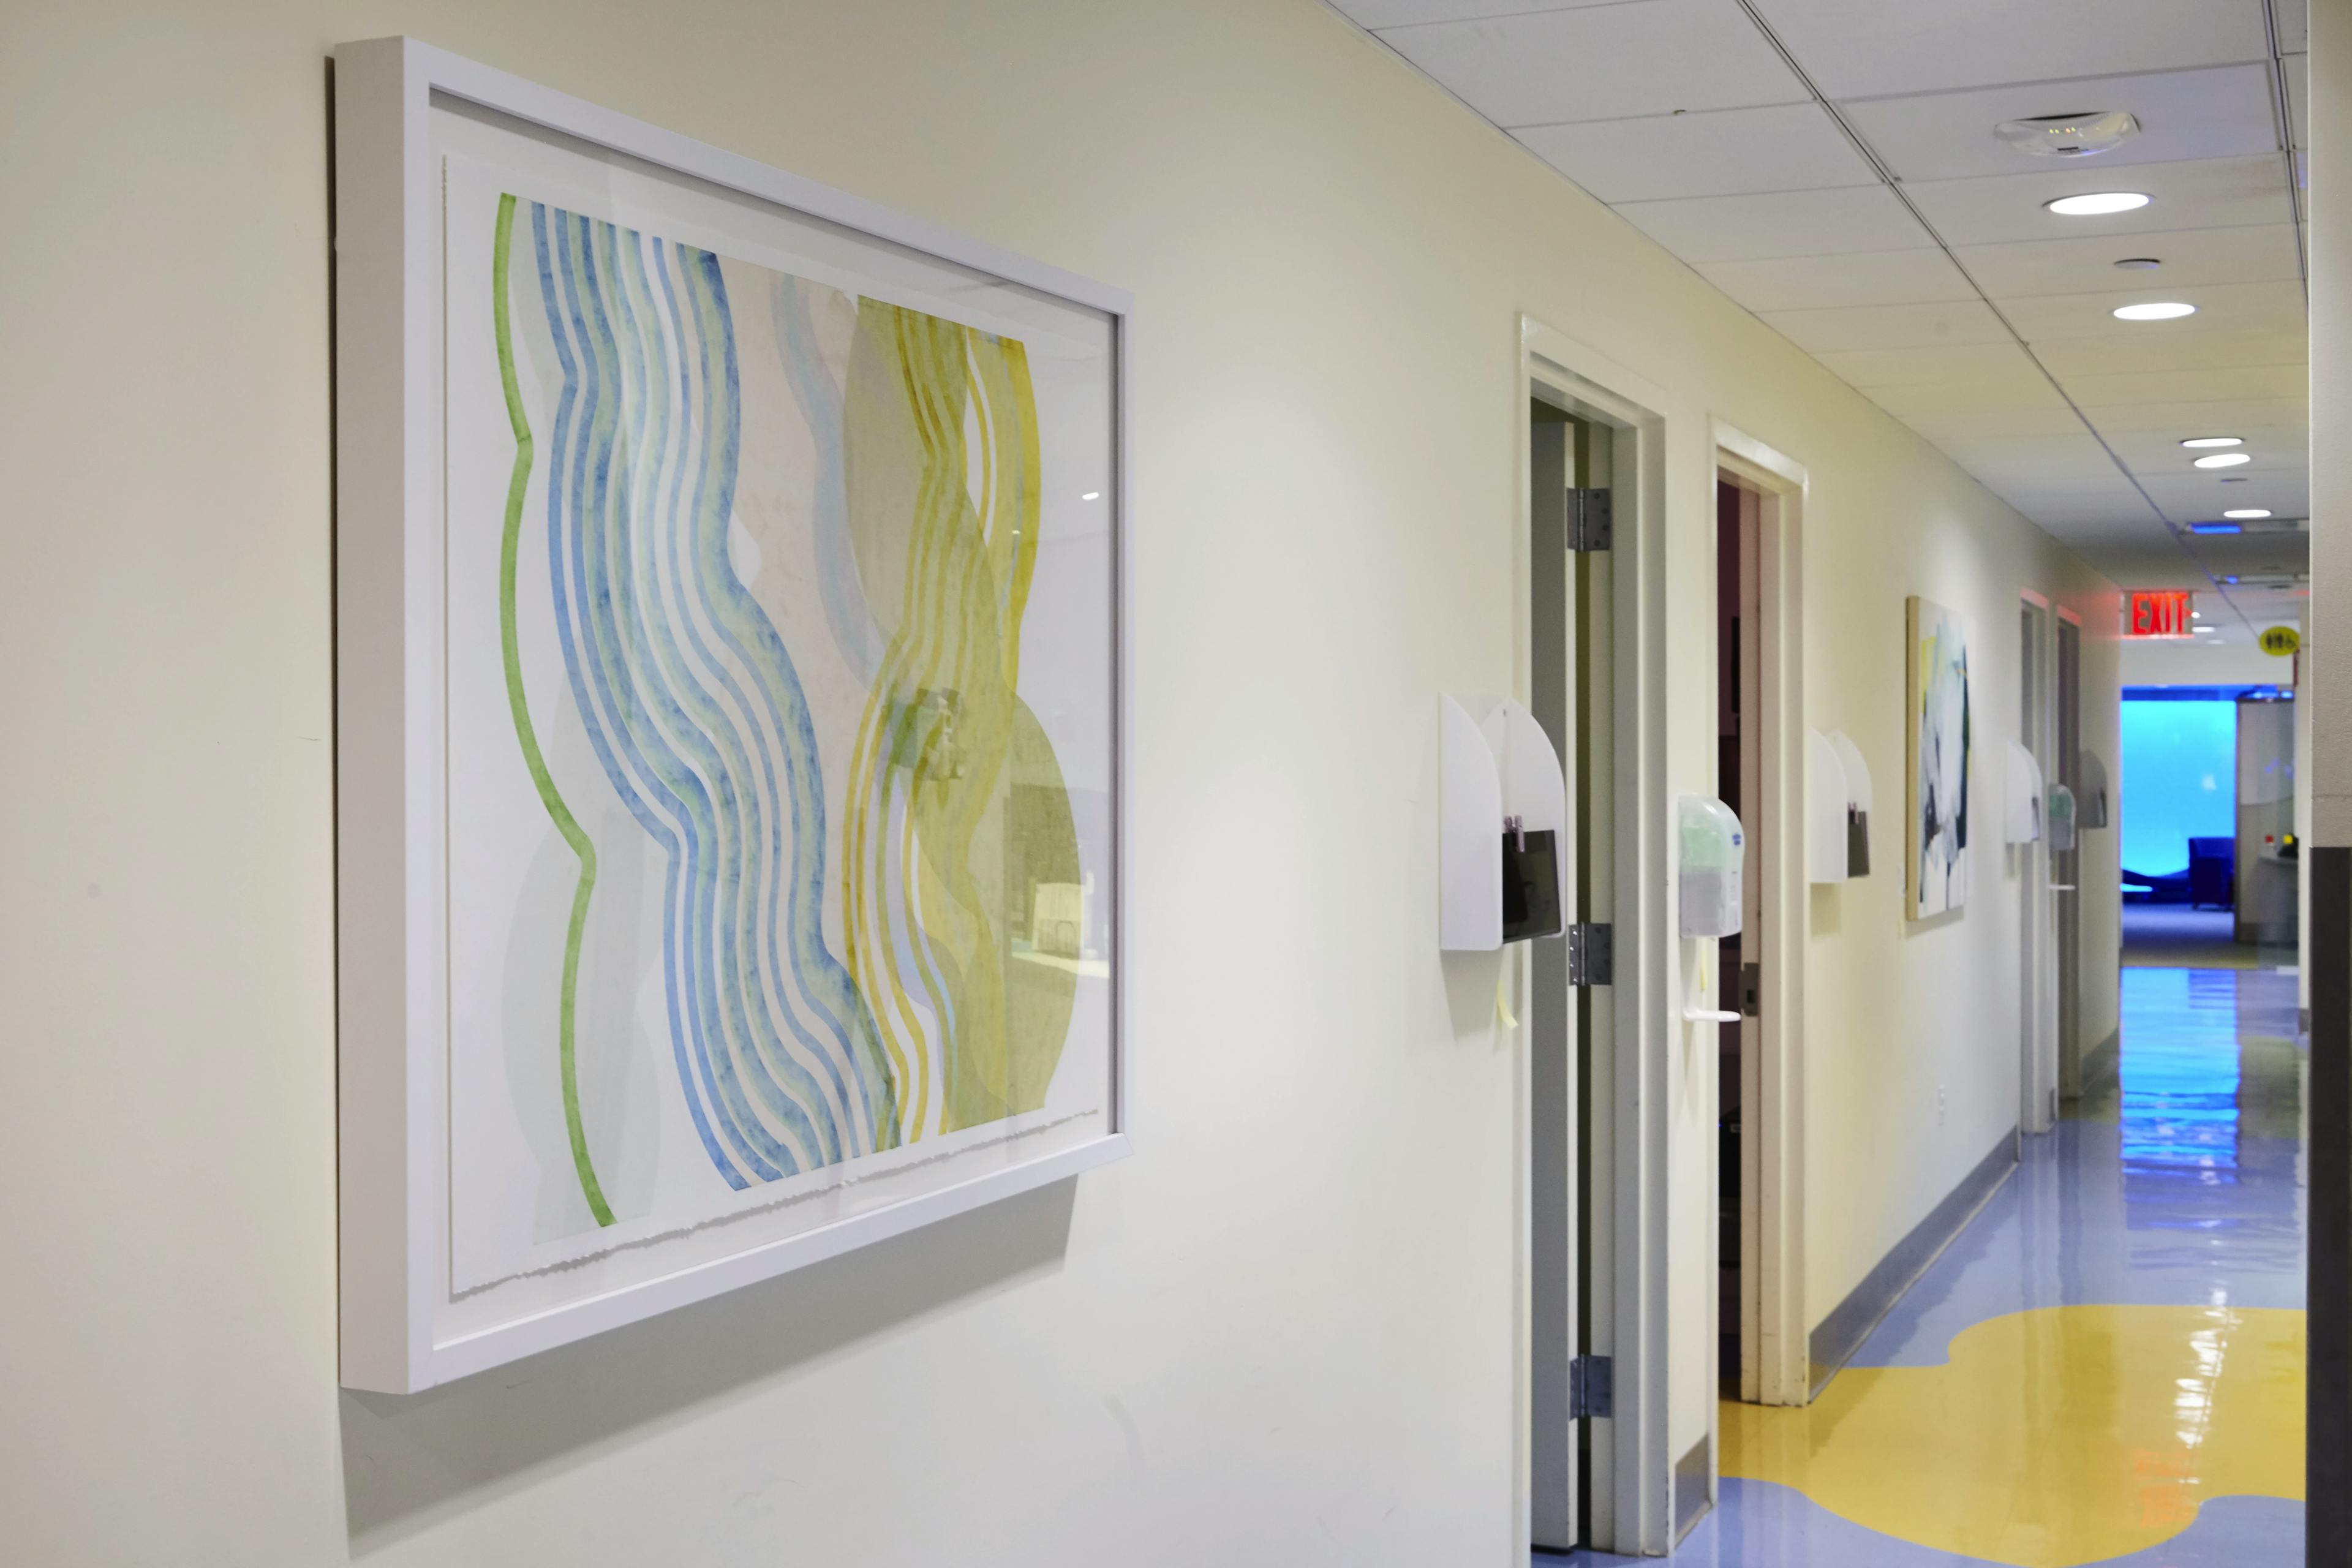 Framed artwork with striated curves installed on the beige wall of a hospital corridor.